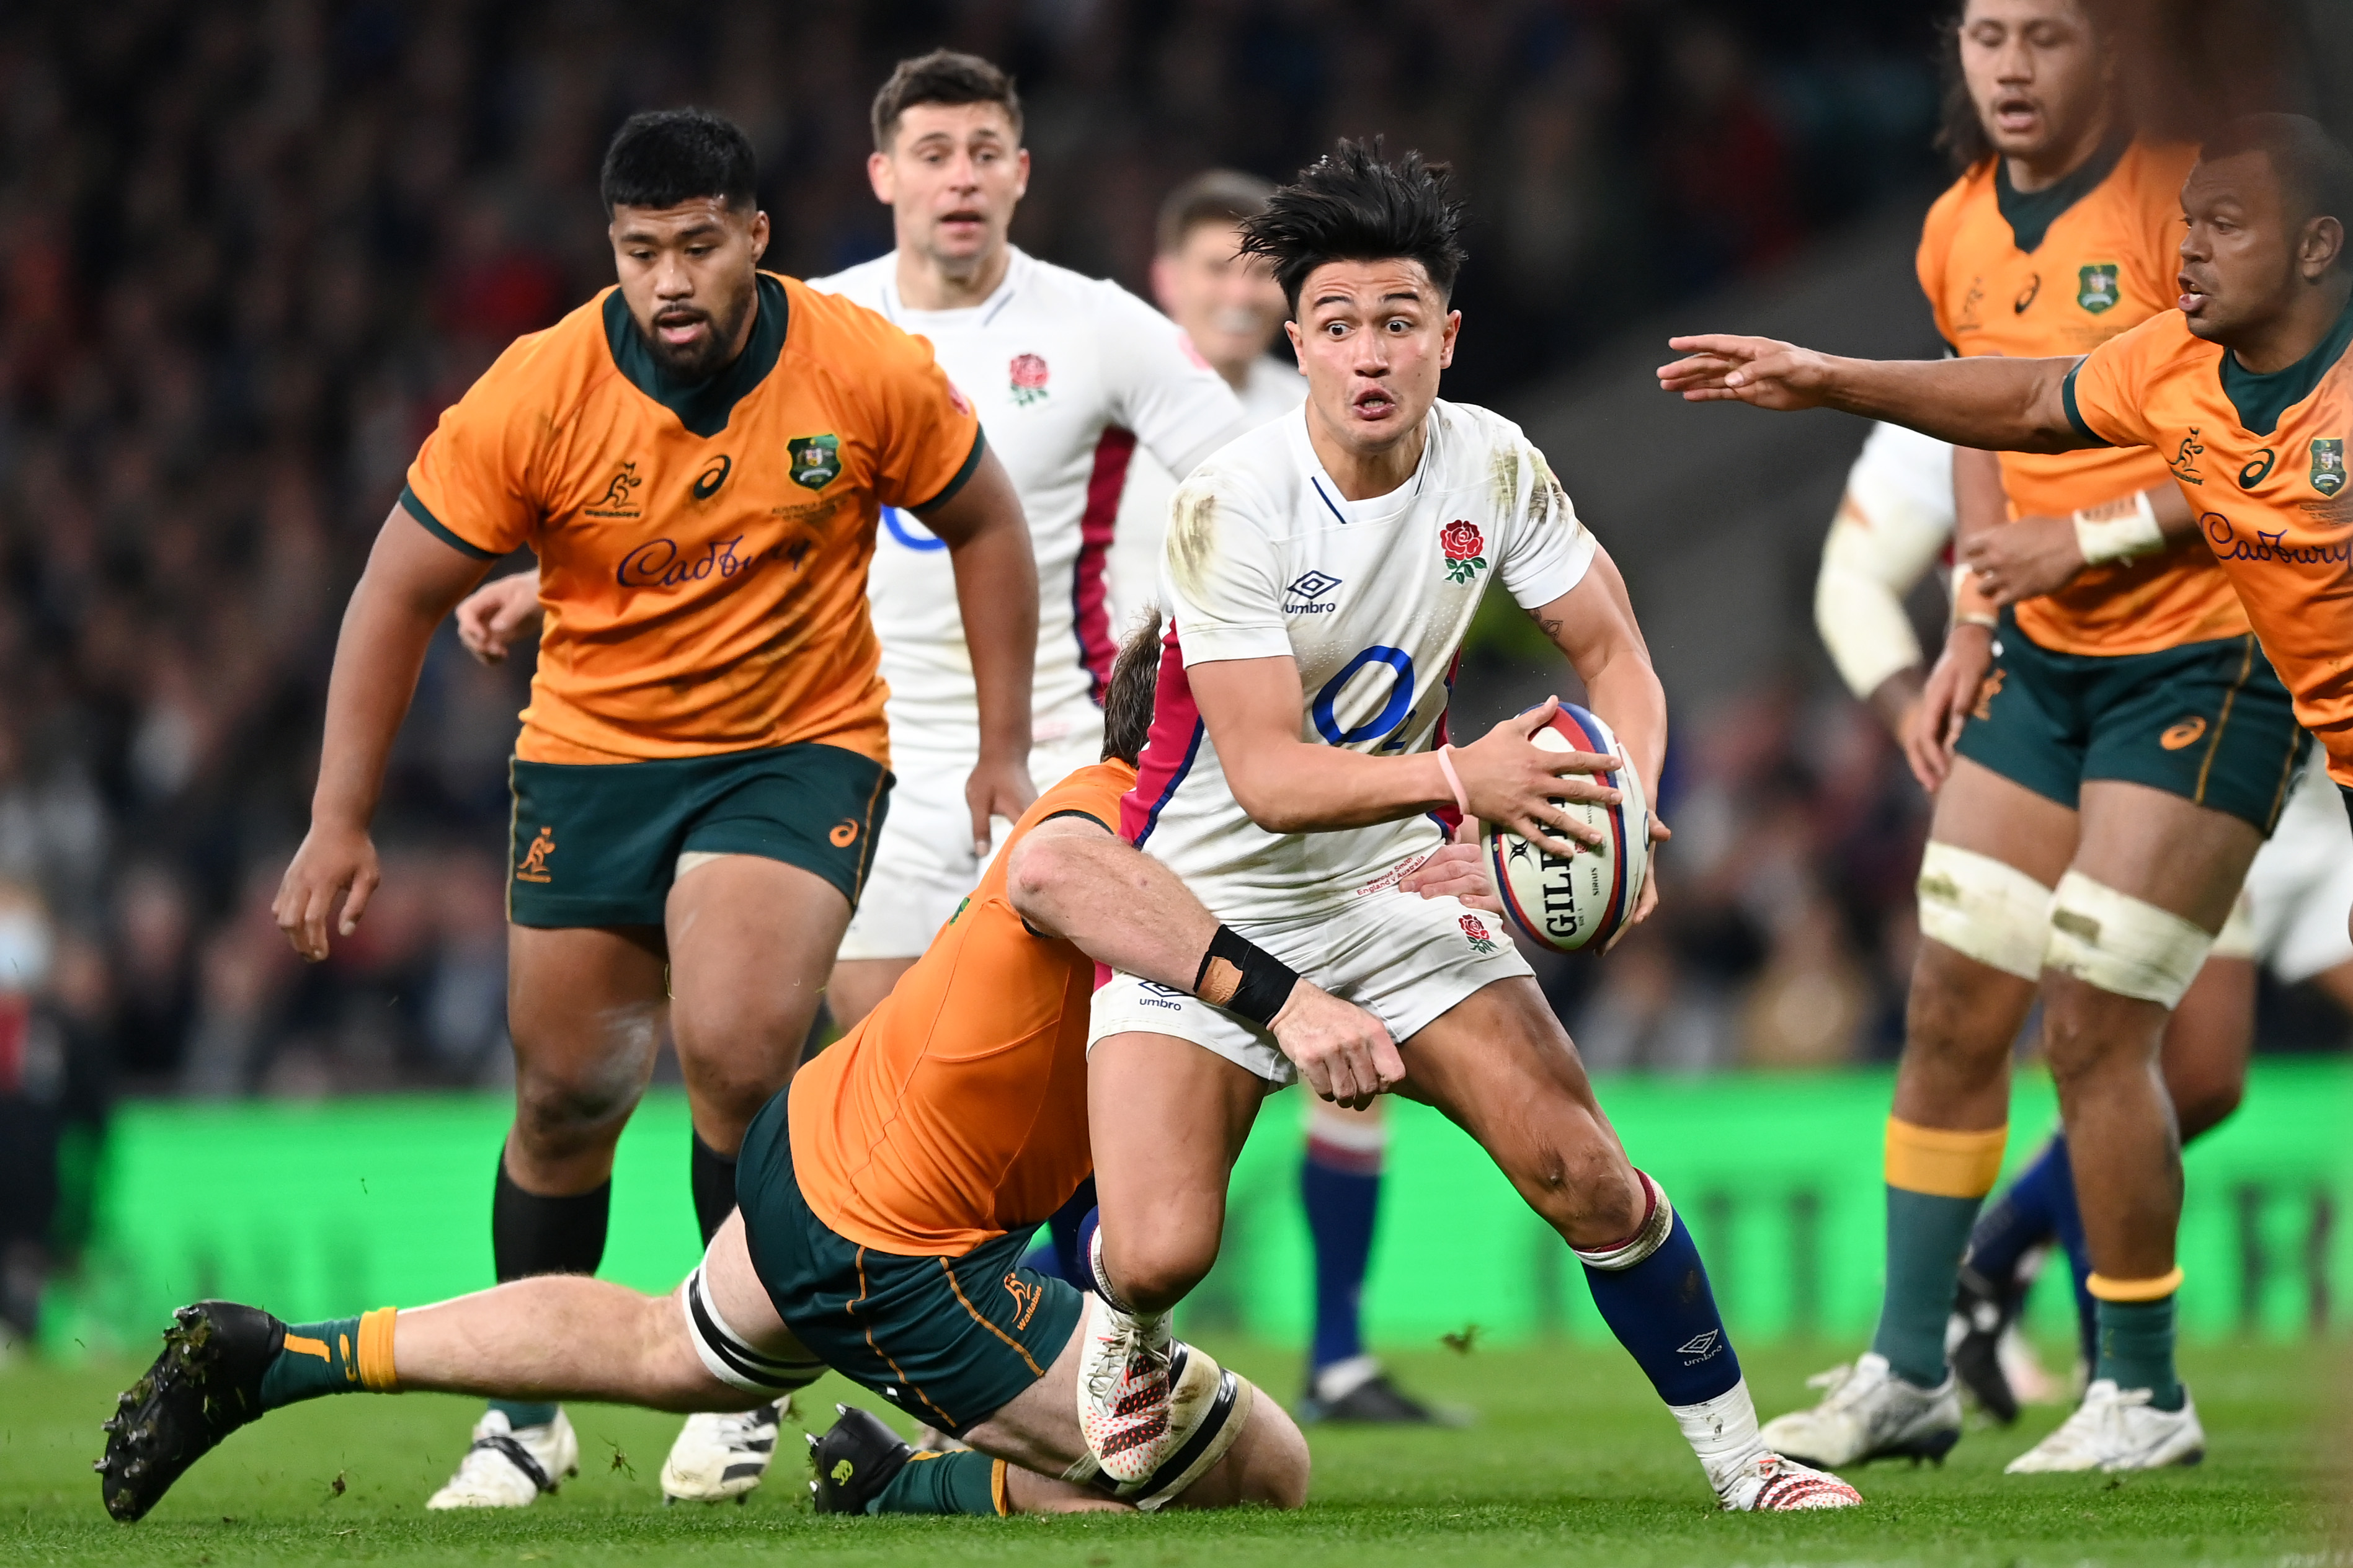 Rugby 2021 LIVE scores Wallabies vs England latest rugby union results, kick off time, news and video highlights from the spring tour